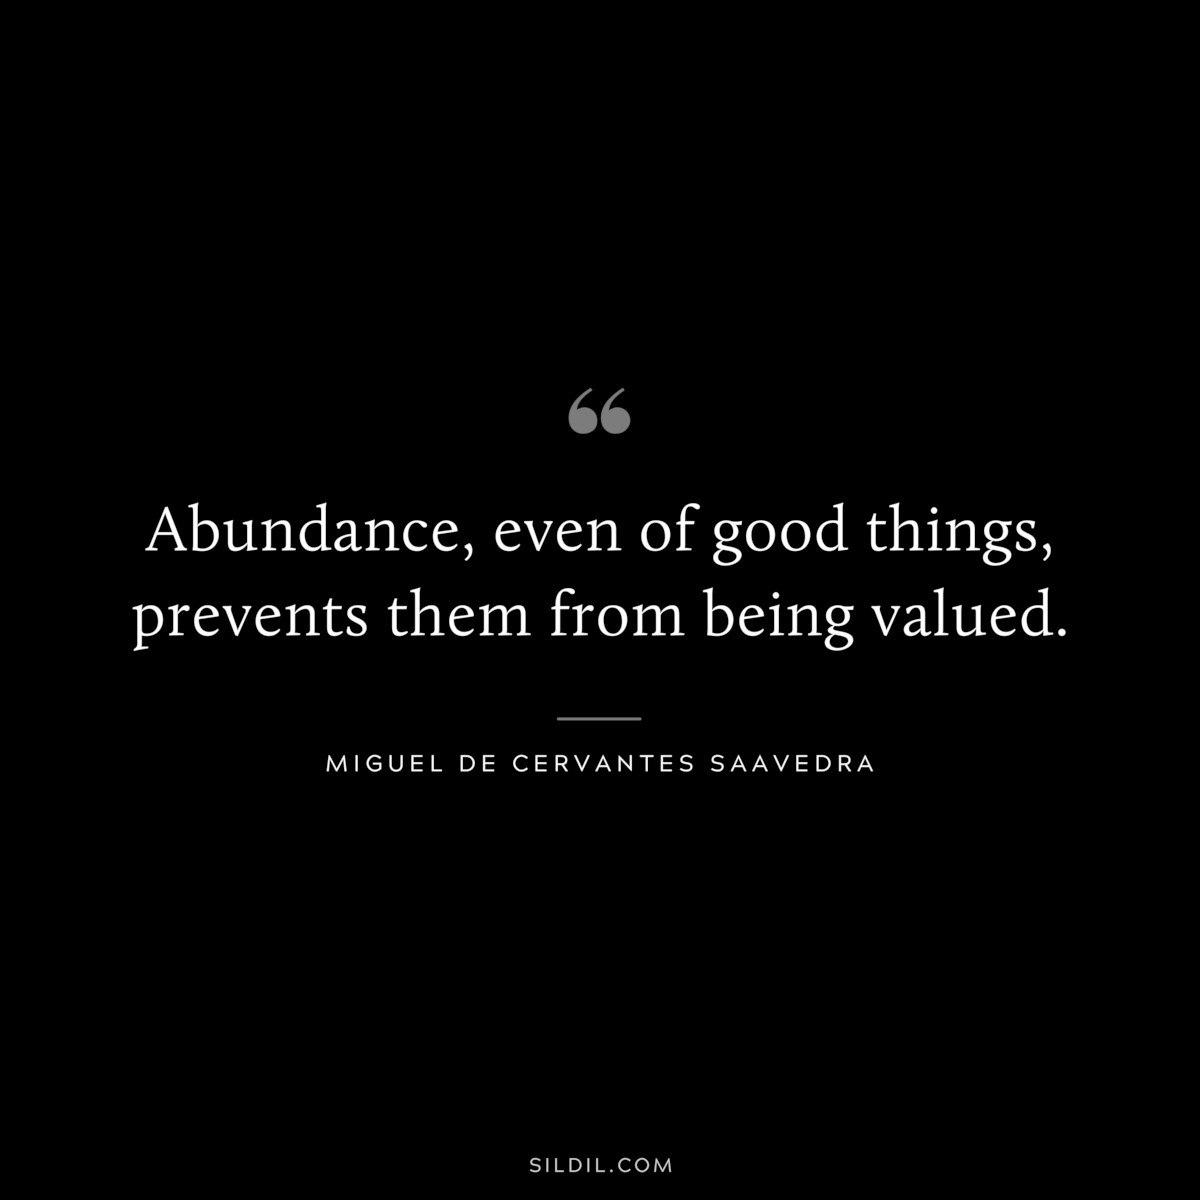 Abundance, even of good things, prevents them from being valued. ― Miguel de Cervantes Saavedra